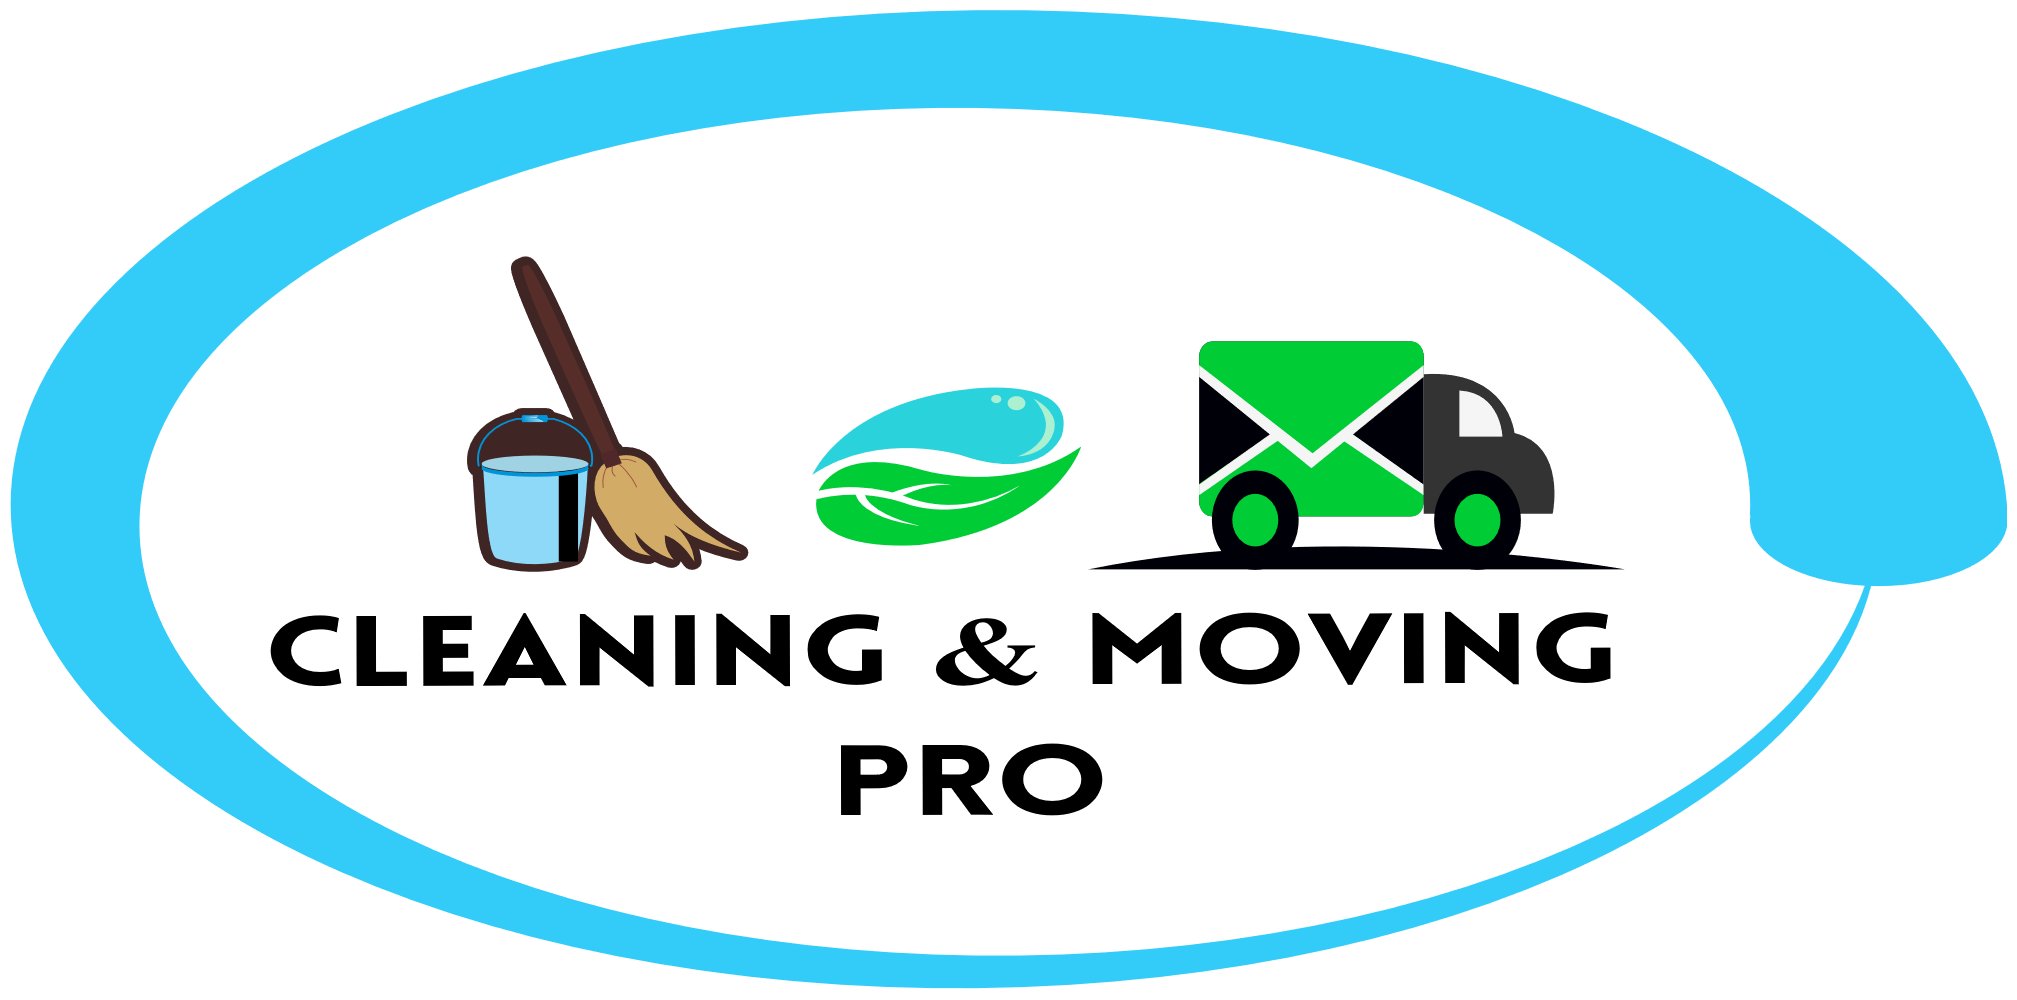 Cleaning Galway/Cleaning Dublin/Cleaning Athlone. Professional Cleaning Services in Galway, Dublin and Athlone. Free Cleaning Quotation_085 7555 612.-CLEANING AND MOVING PRO